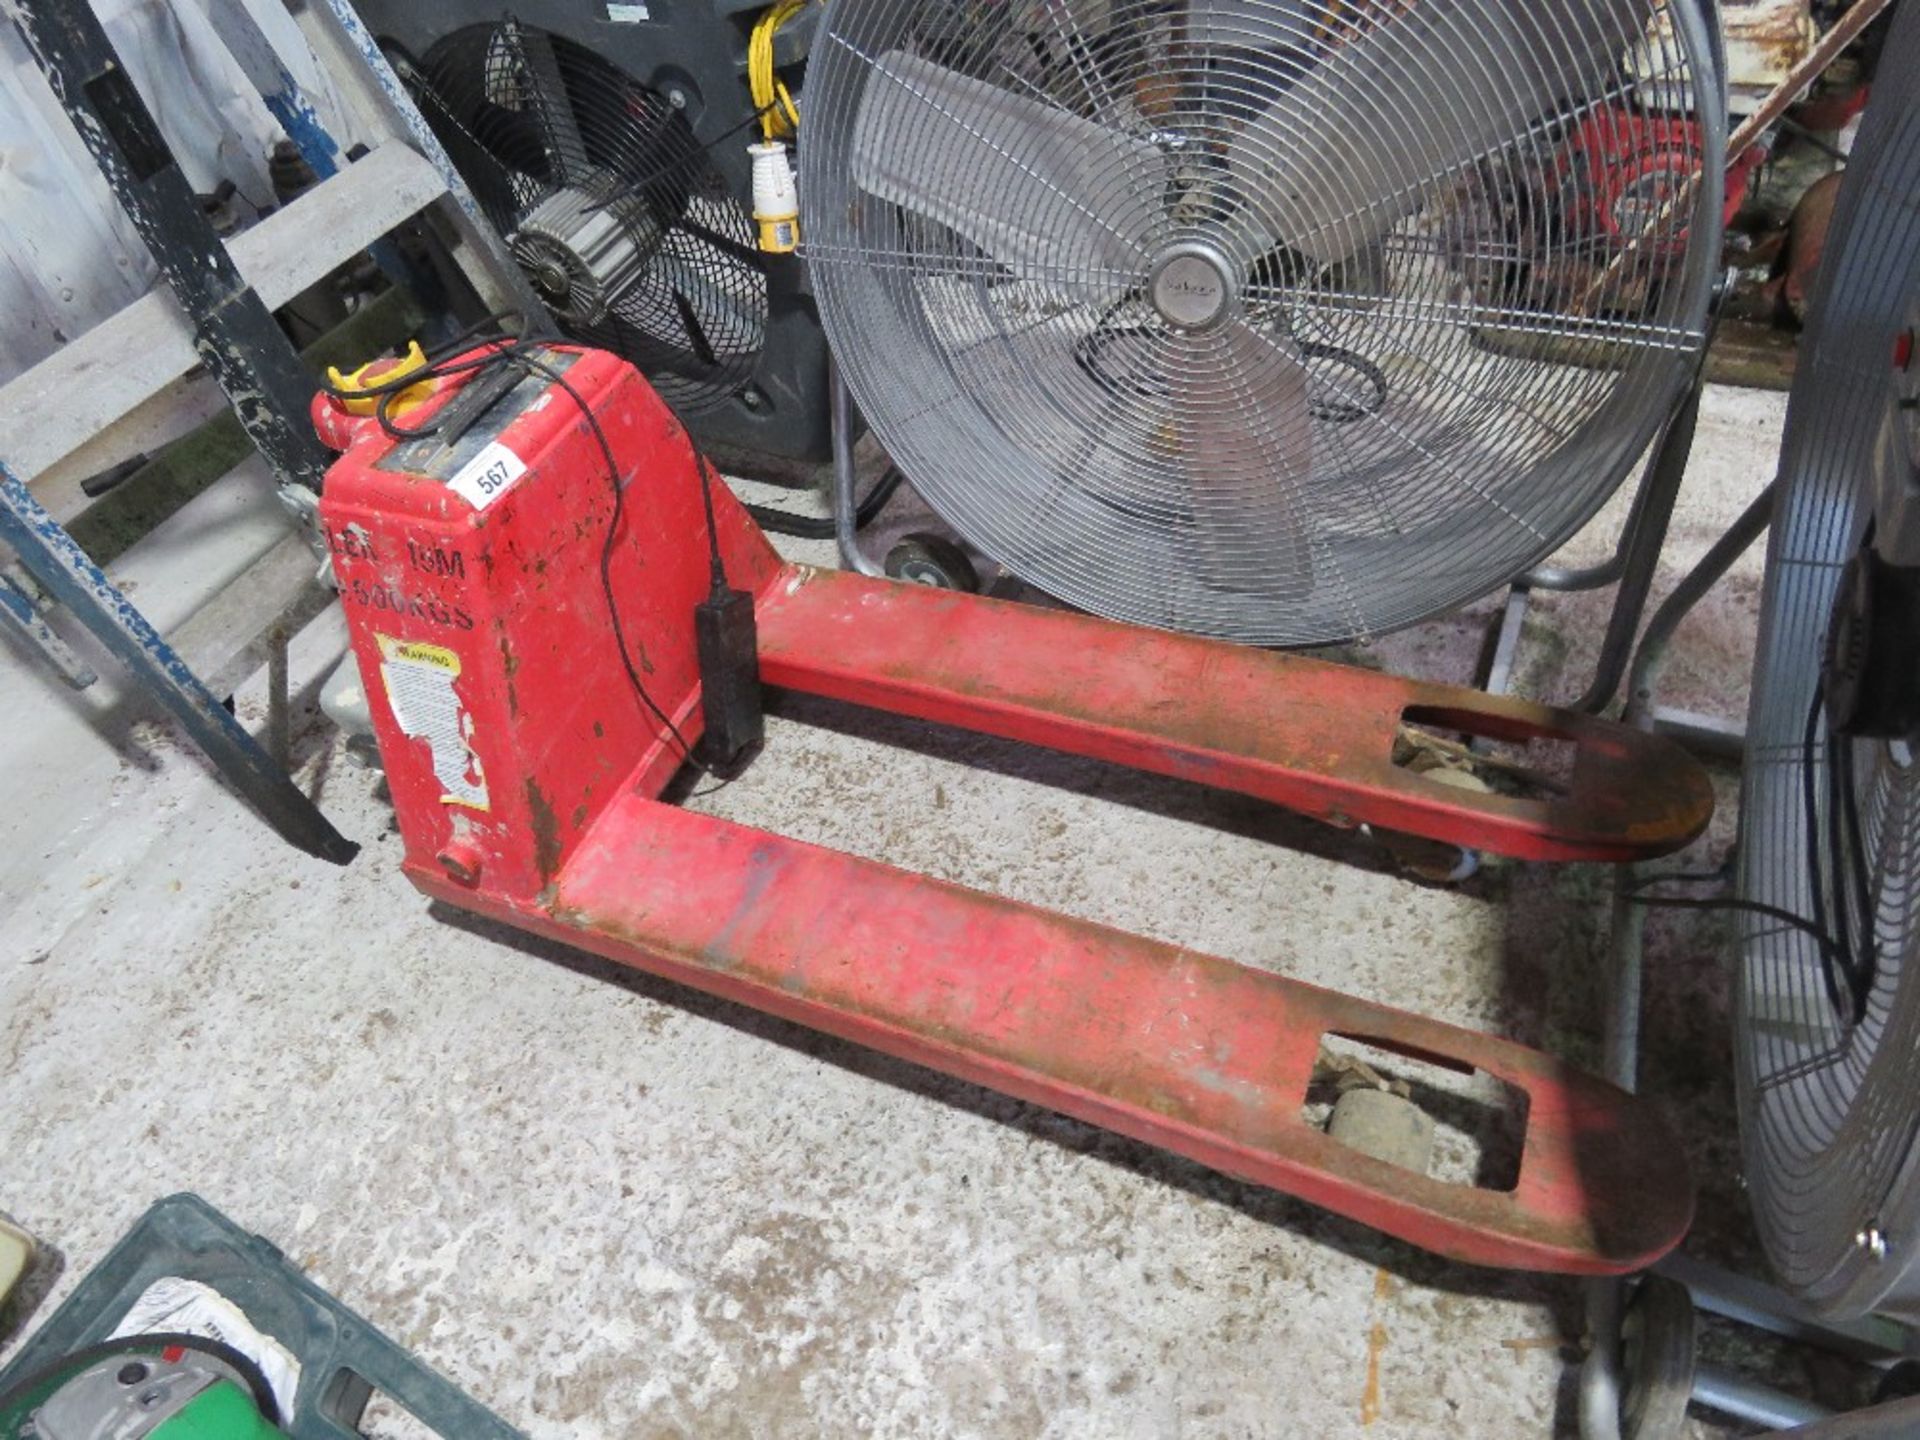 BATTERY POWERED PALLET TRUCK. WHEN TESTED WAS SEEN TO LIFT, LOWER AND DRIVE. WITH A CHARGER.